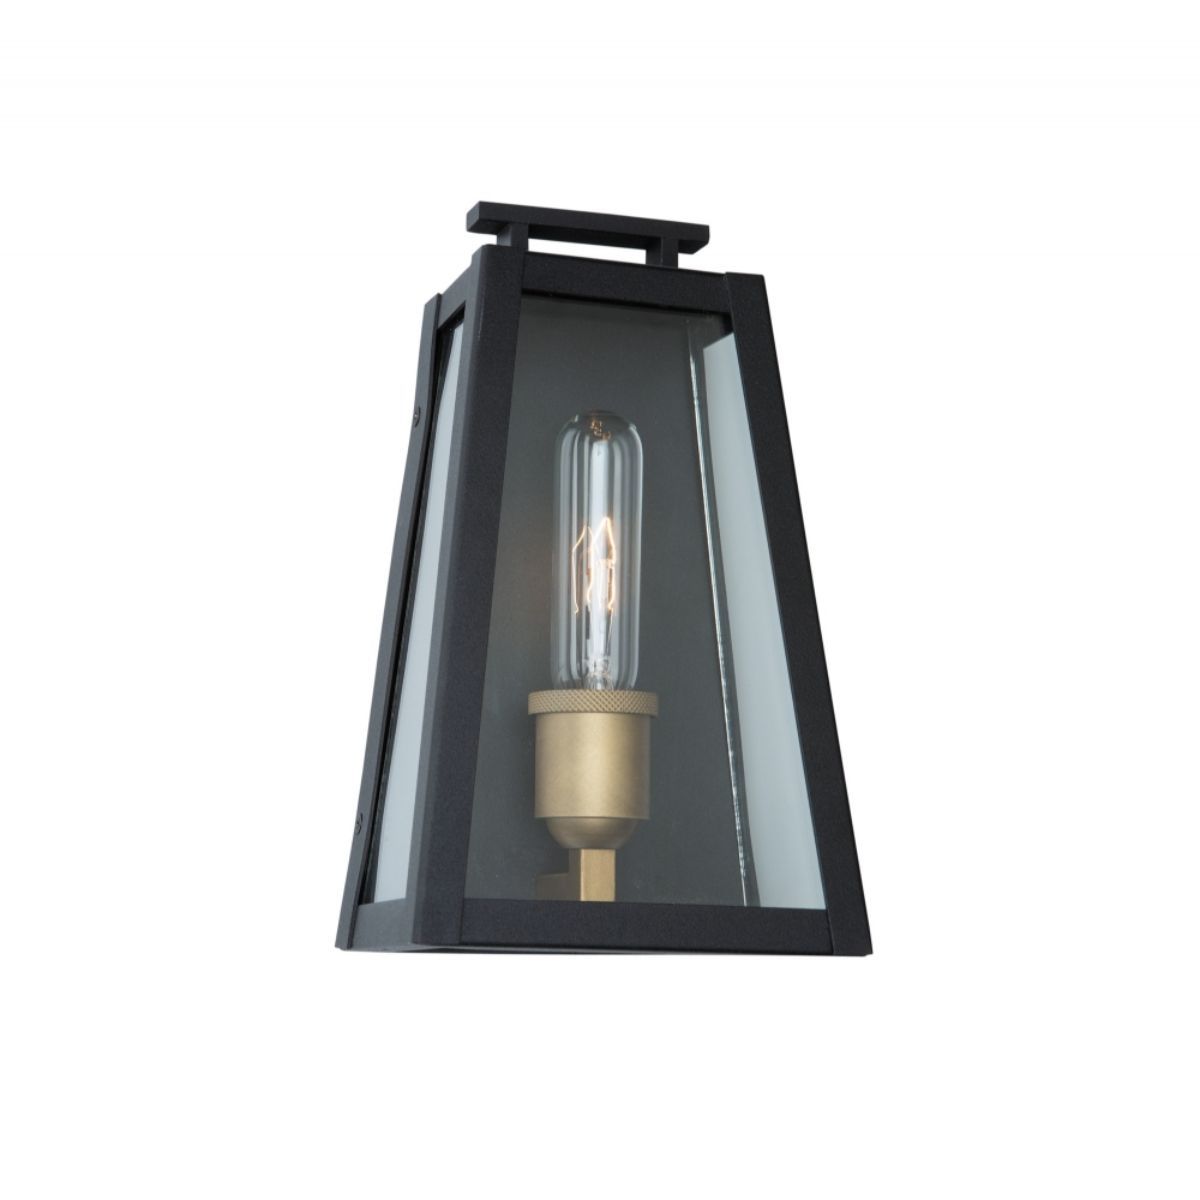 Charlestown 10 in. Outdoor Wall Sconce Black Finish